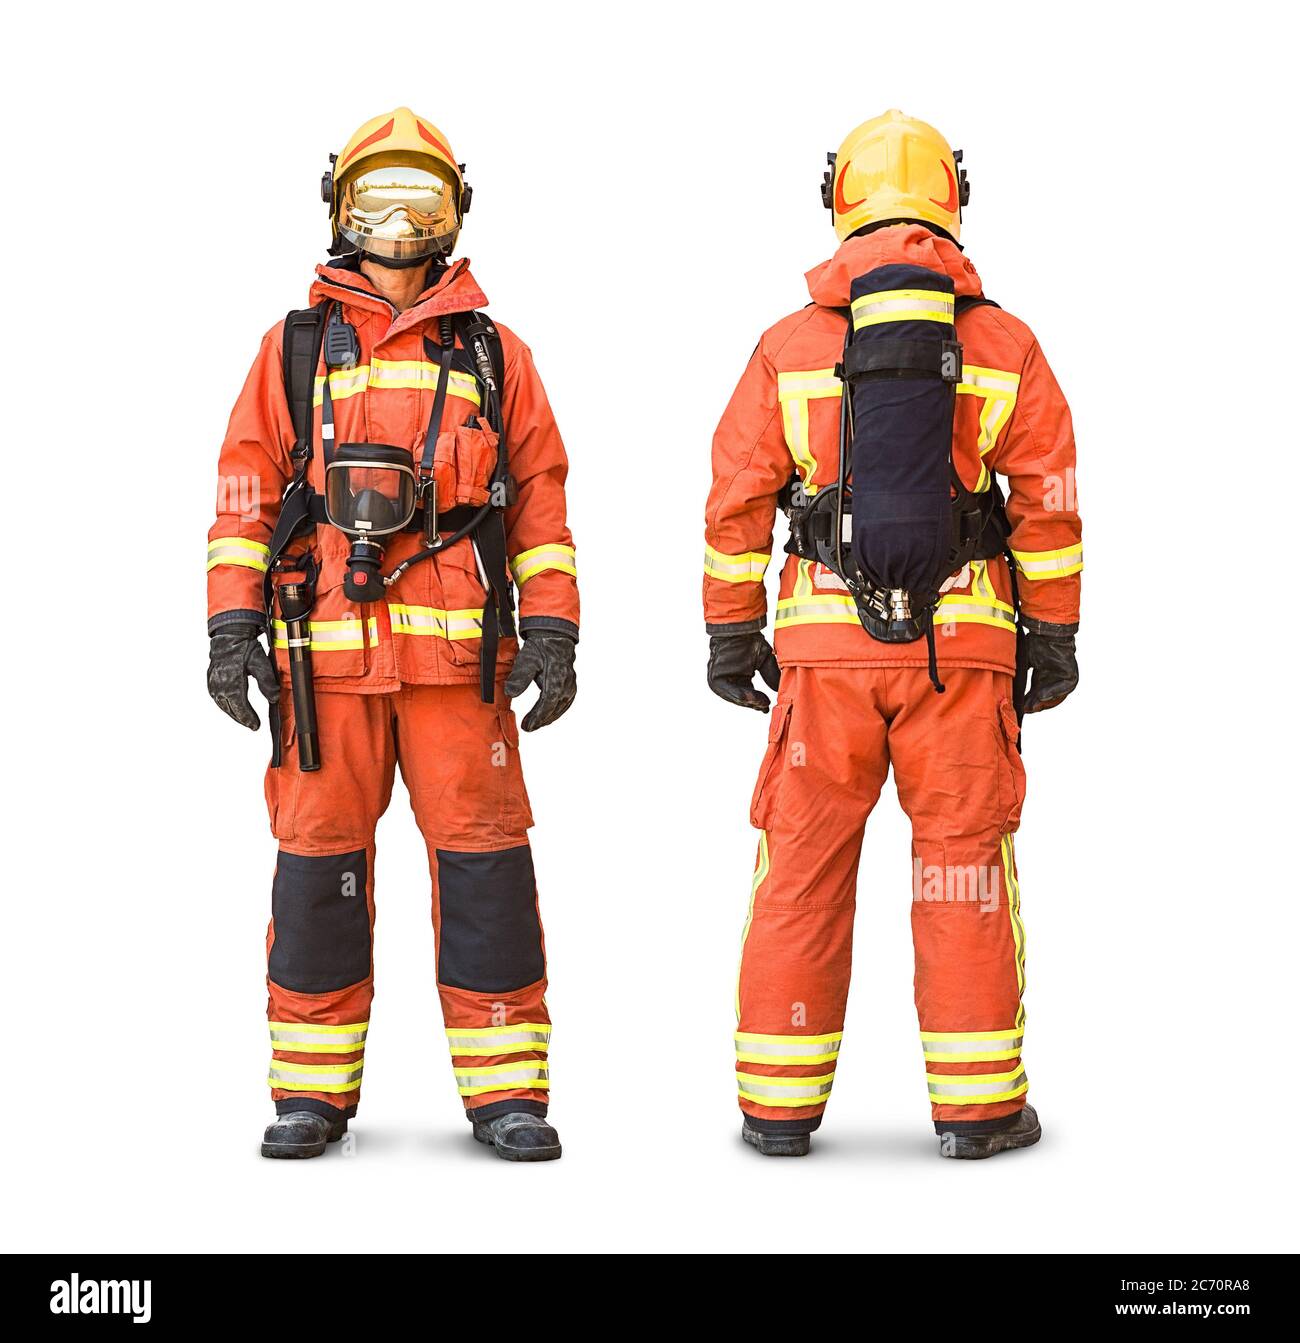 Stock photo of an isolated firefighter showing full gear and clothing in a front and rear view Stock Photo